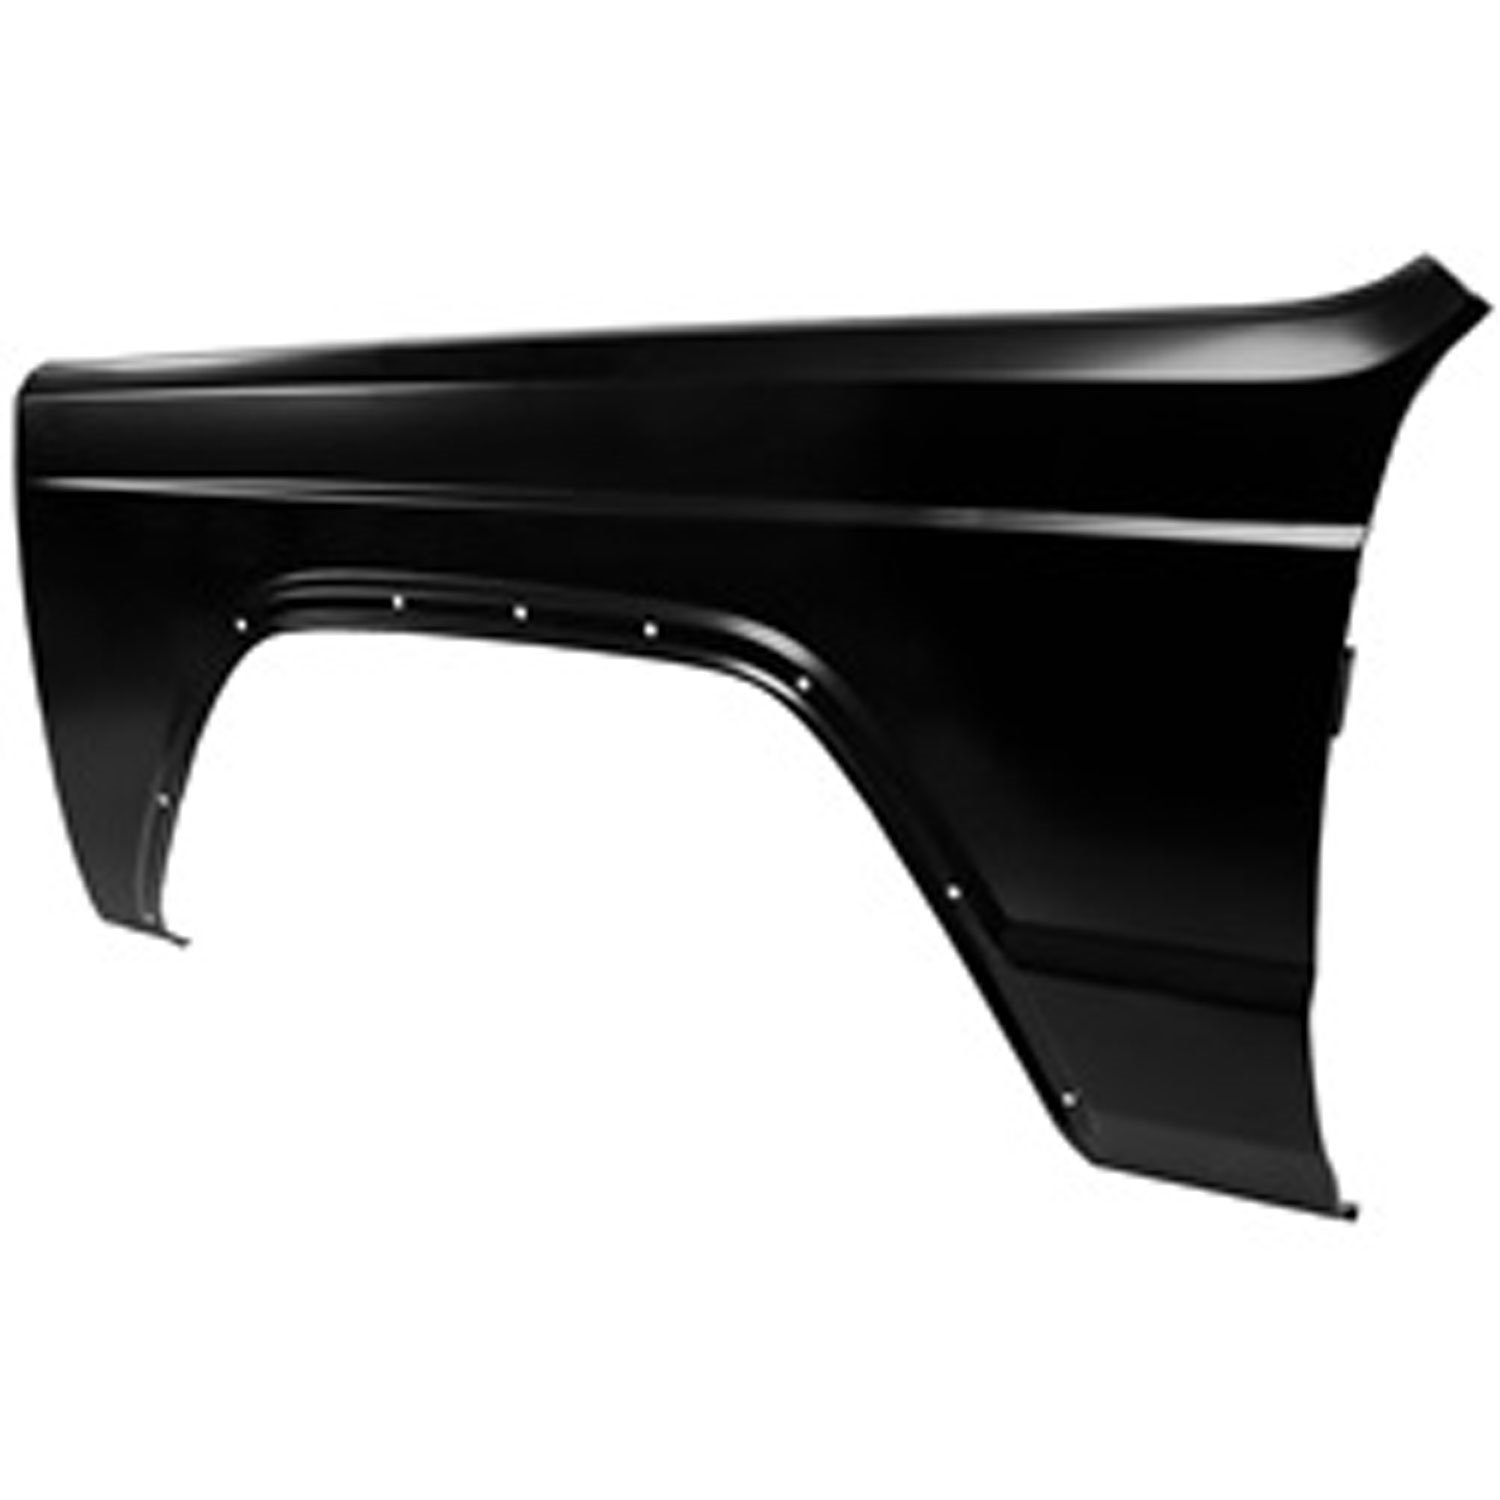 Replacement front fender from Omix-ADA, Fits left side on 84-96 Jeep Cherokee XJ